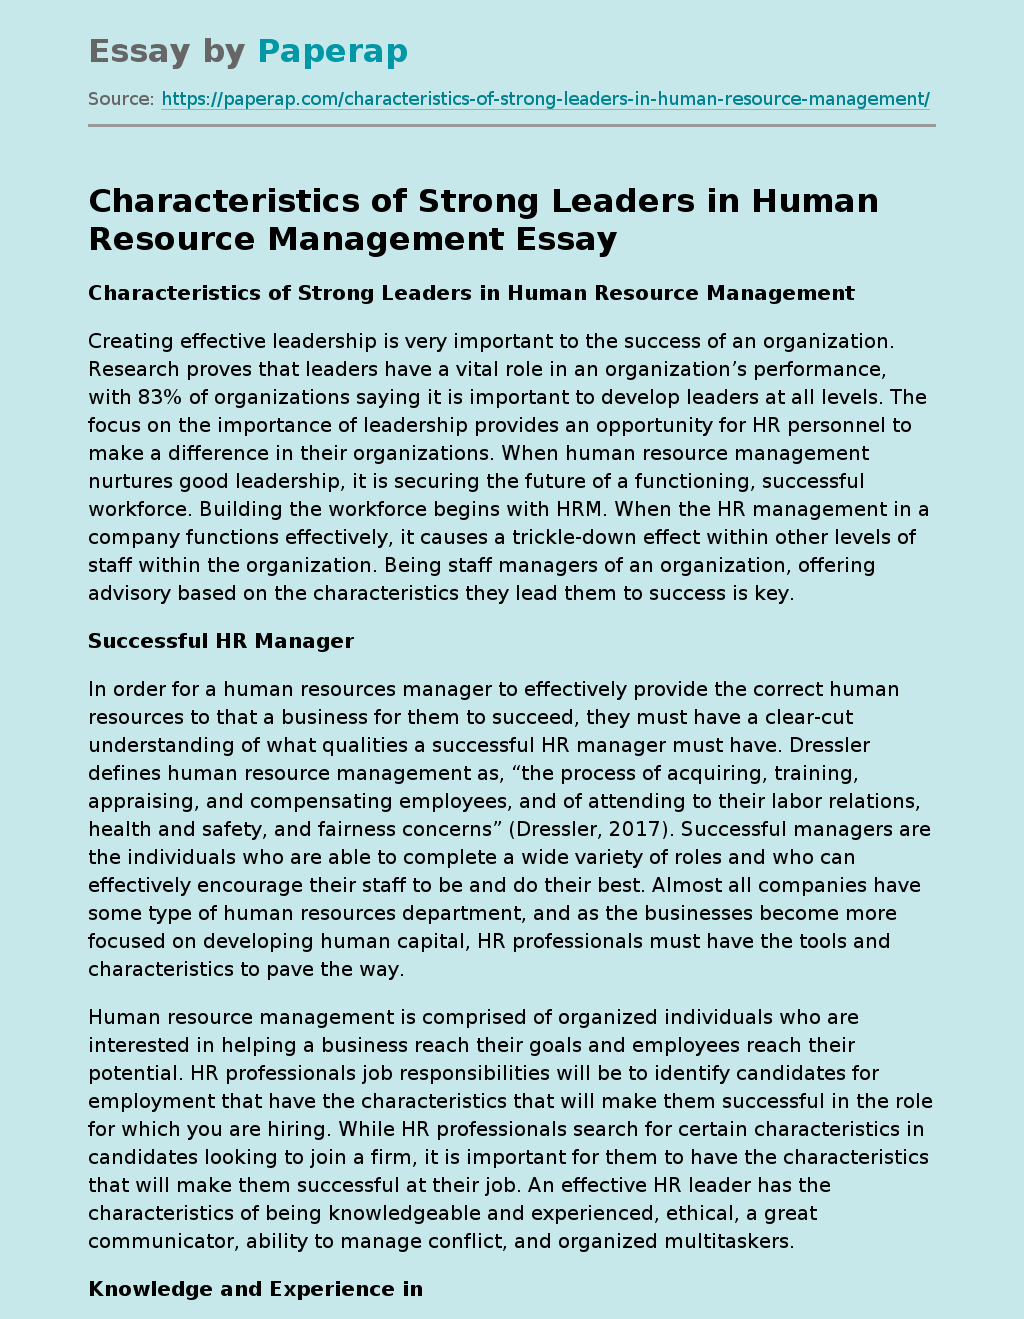 Characteristics of Strong Leaders in Human Resource Management